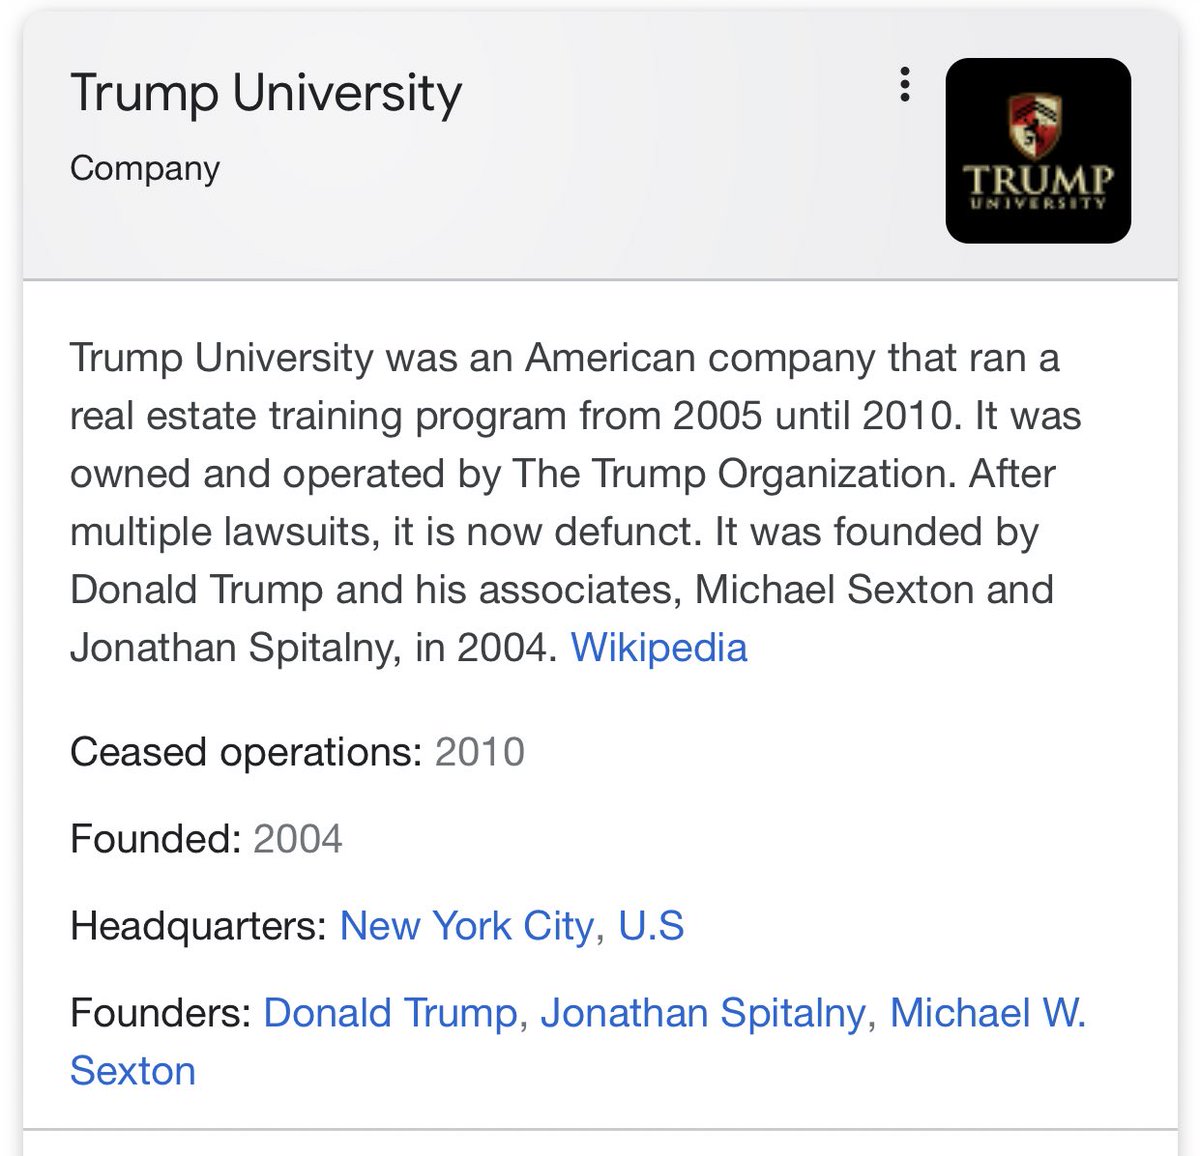 ALSO don’t let this man be in charge of your education! Trump University didn’t even last a decade. How do you think this would pan out? THE EXACT SAME. Don’t let your tax dollars go to waste on a get rich quick scheme.